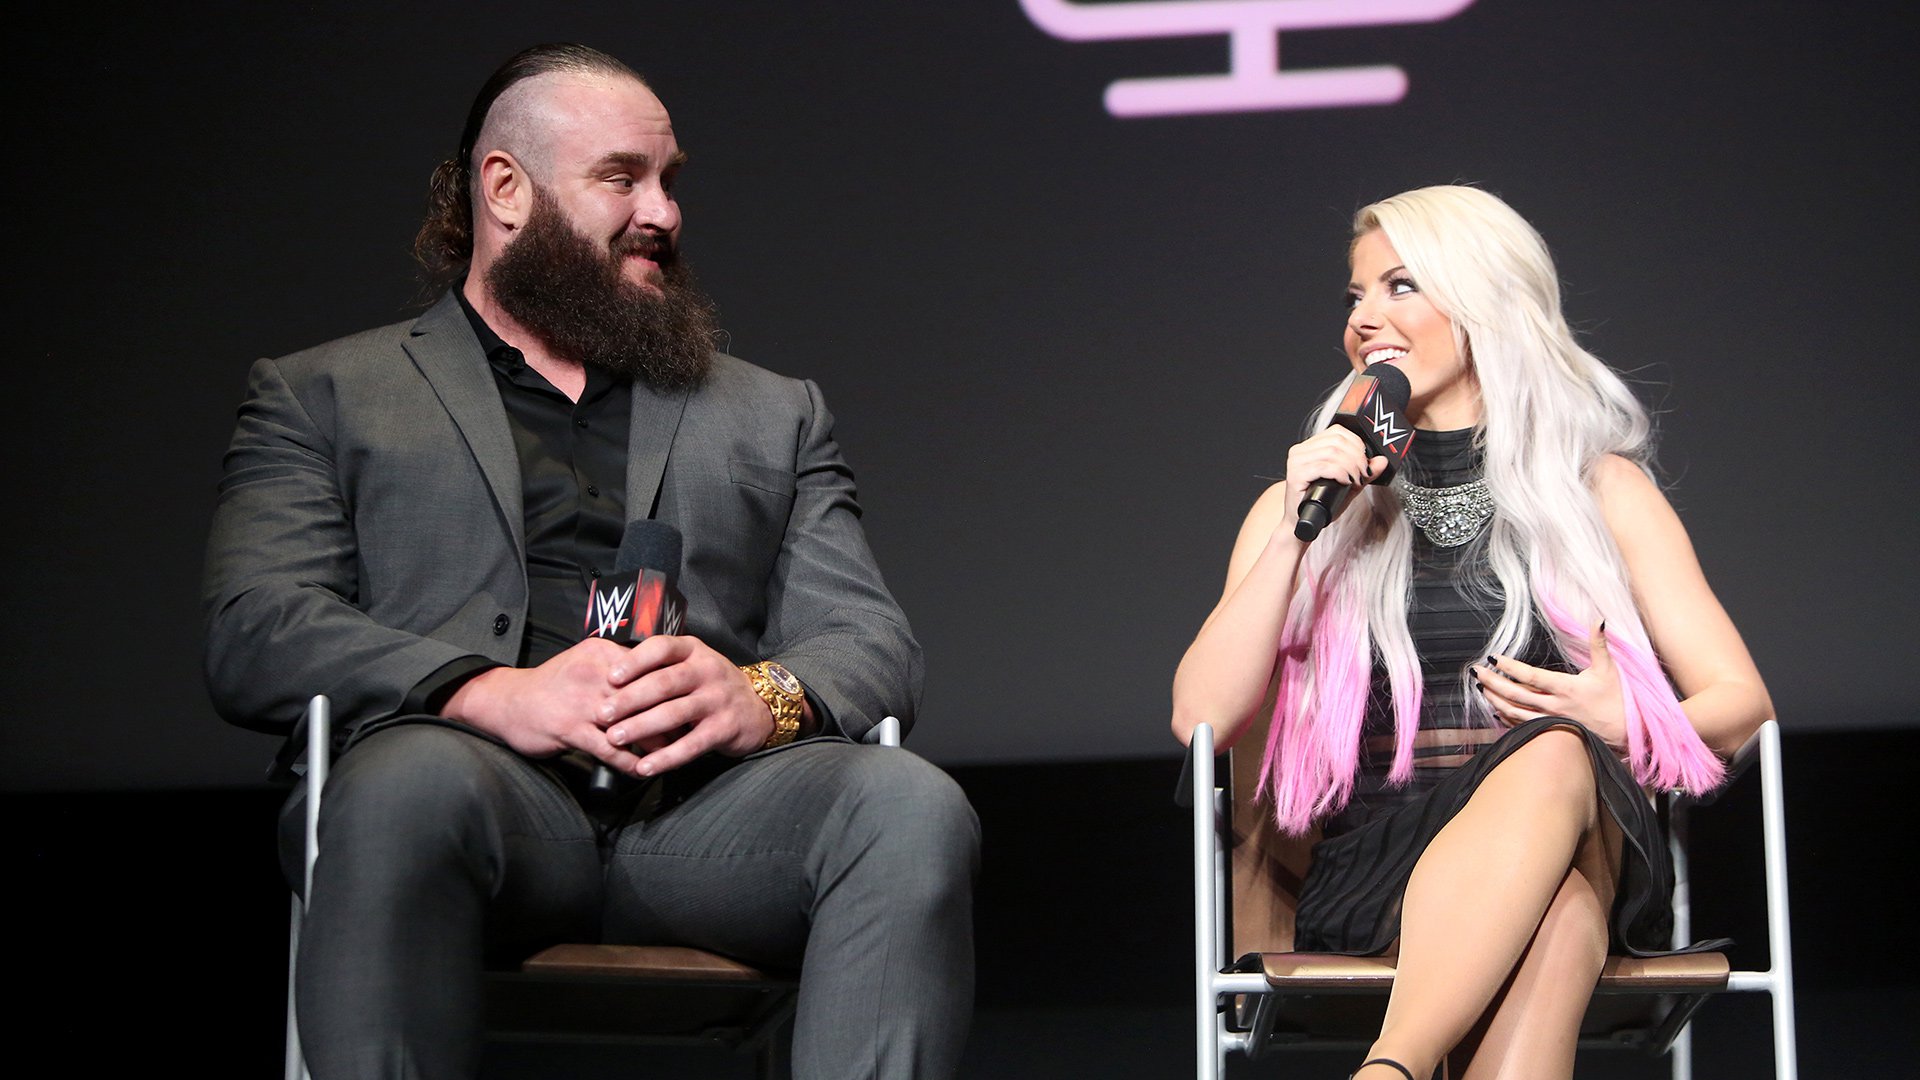 Do You Think Braun Strowman Has Had Sex With Alexa Bliss